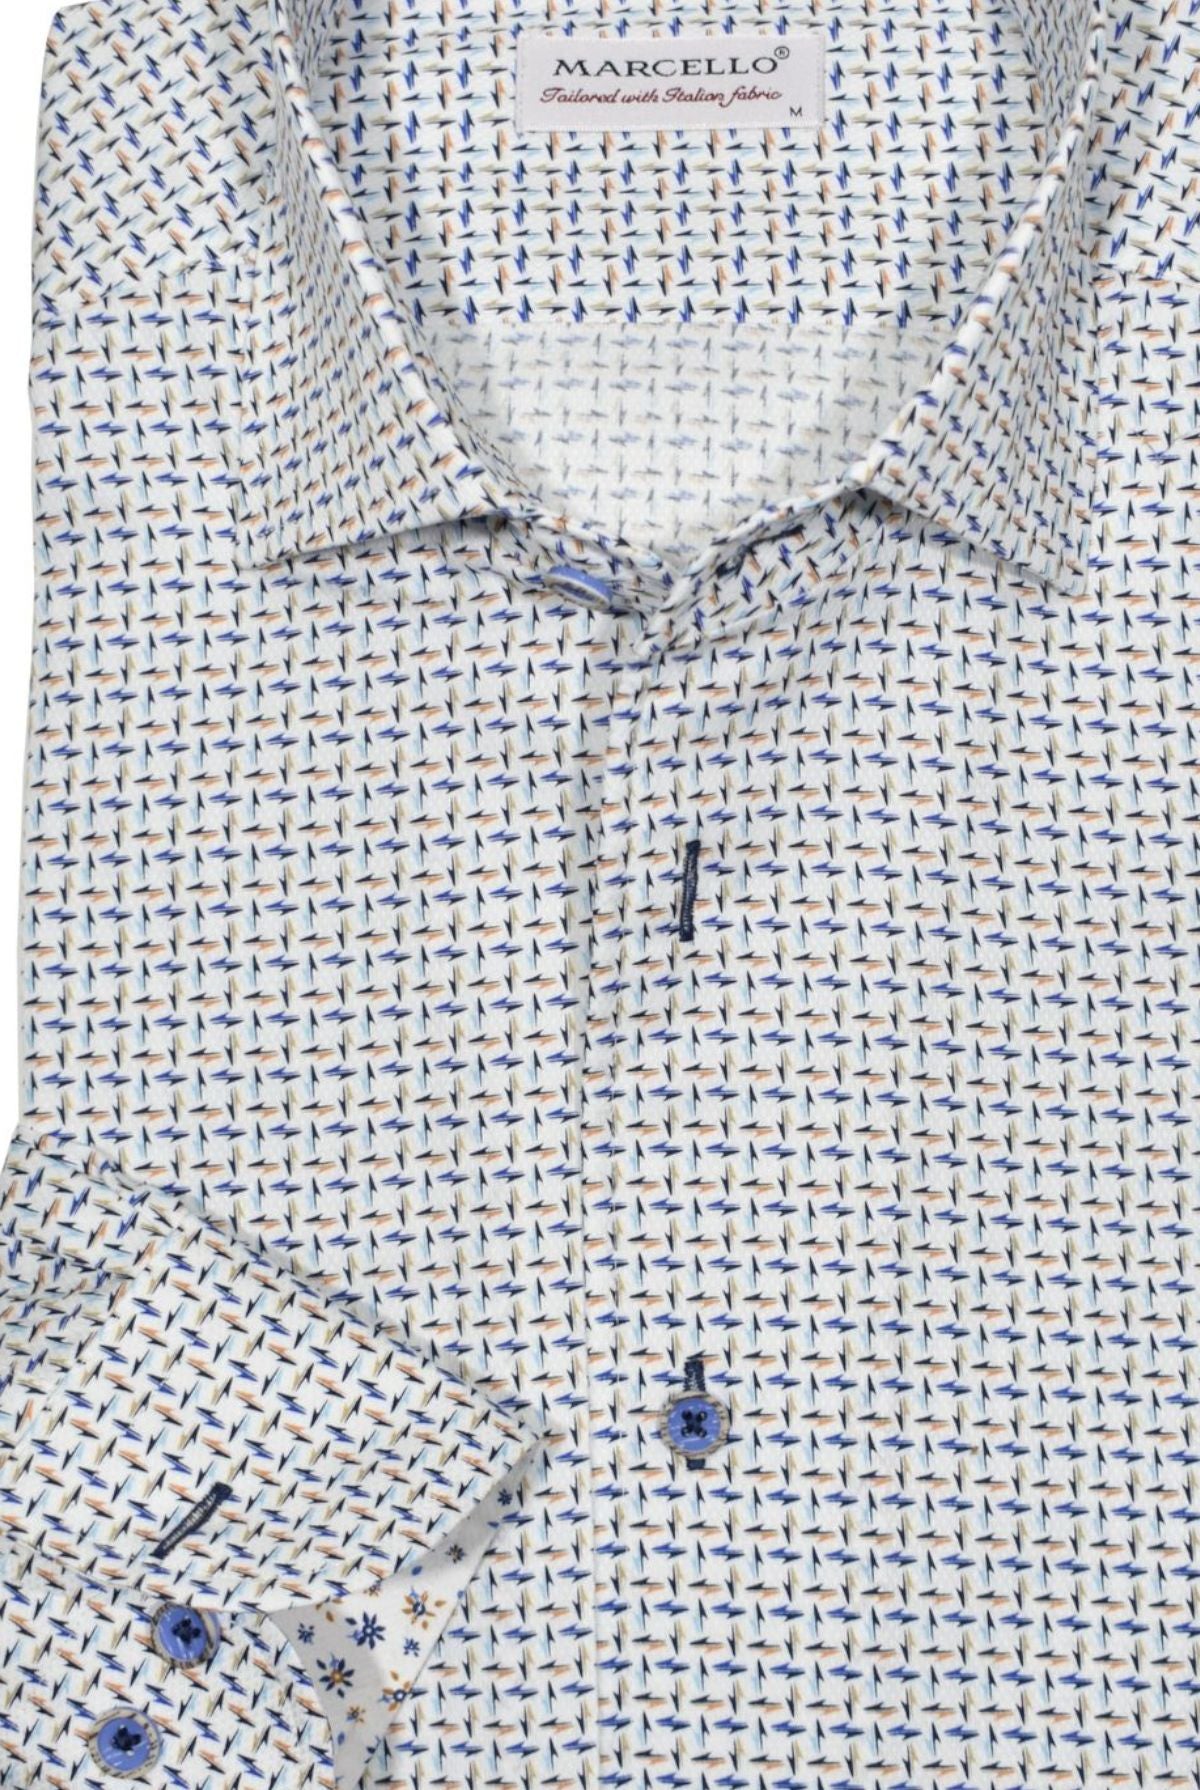 The Marcello exclusive design is like no other, creating a dignified look with a collar that stands perfectly whether worn alone or under a sport coat. Its unique placket ensures a smooth, crisp appearance. Style W848R